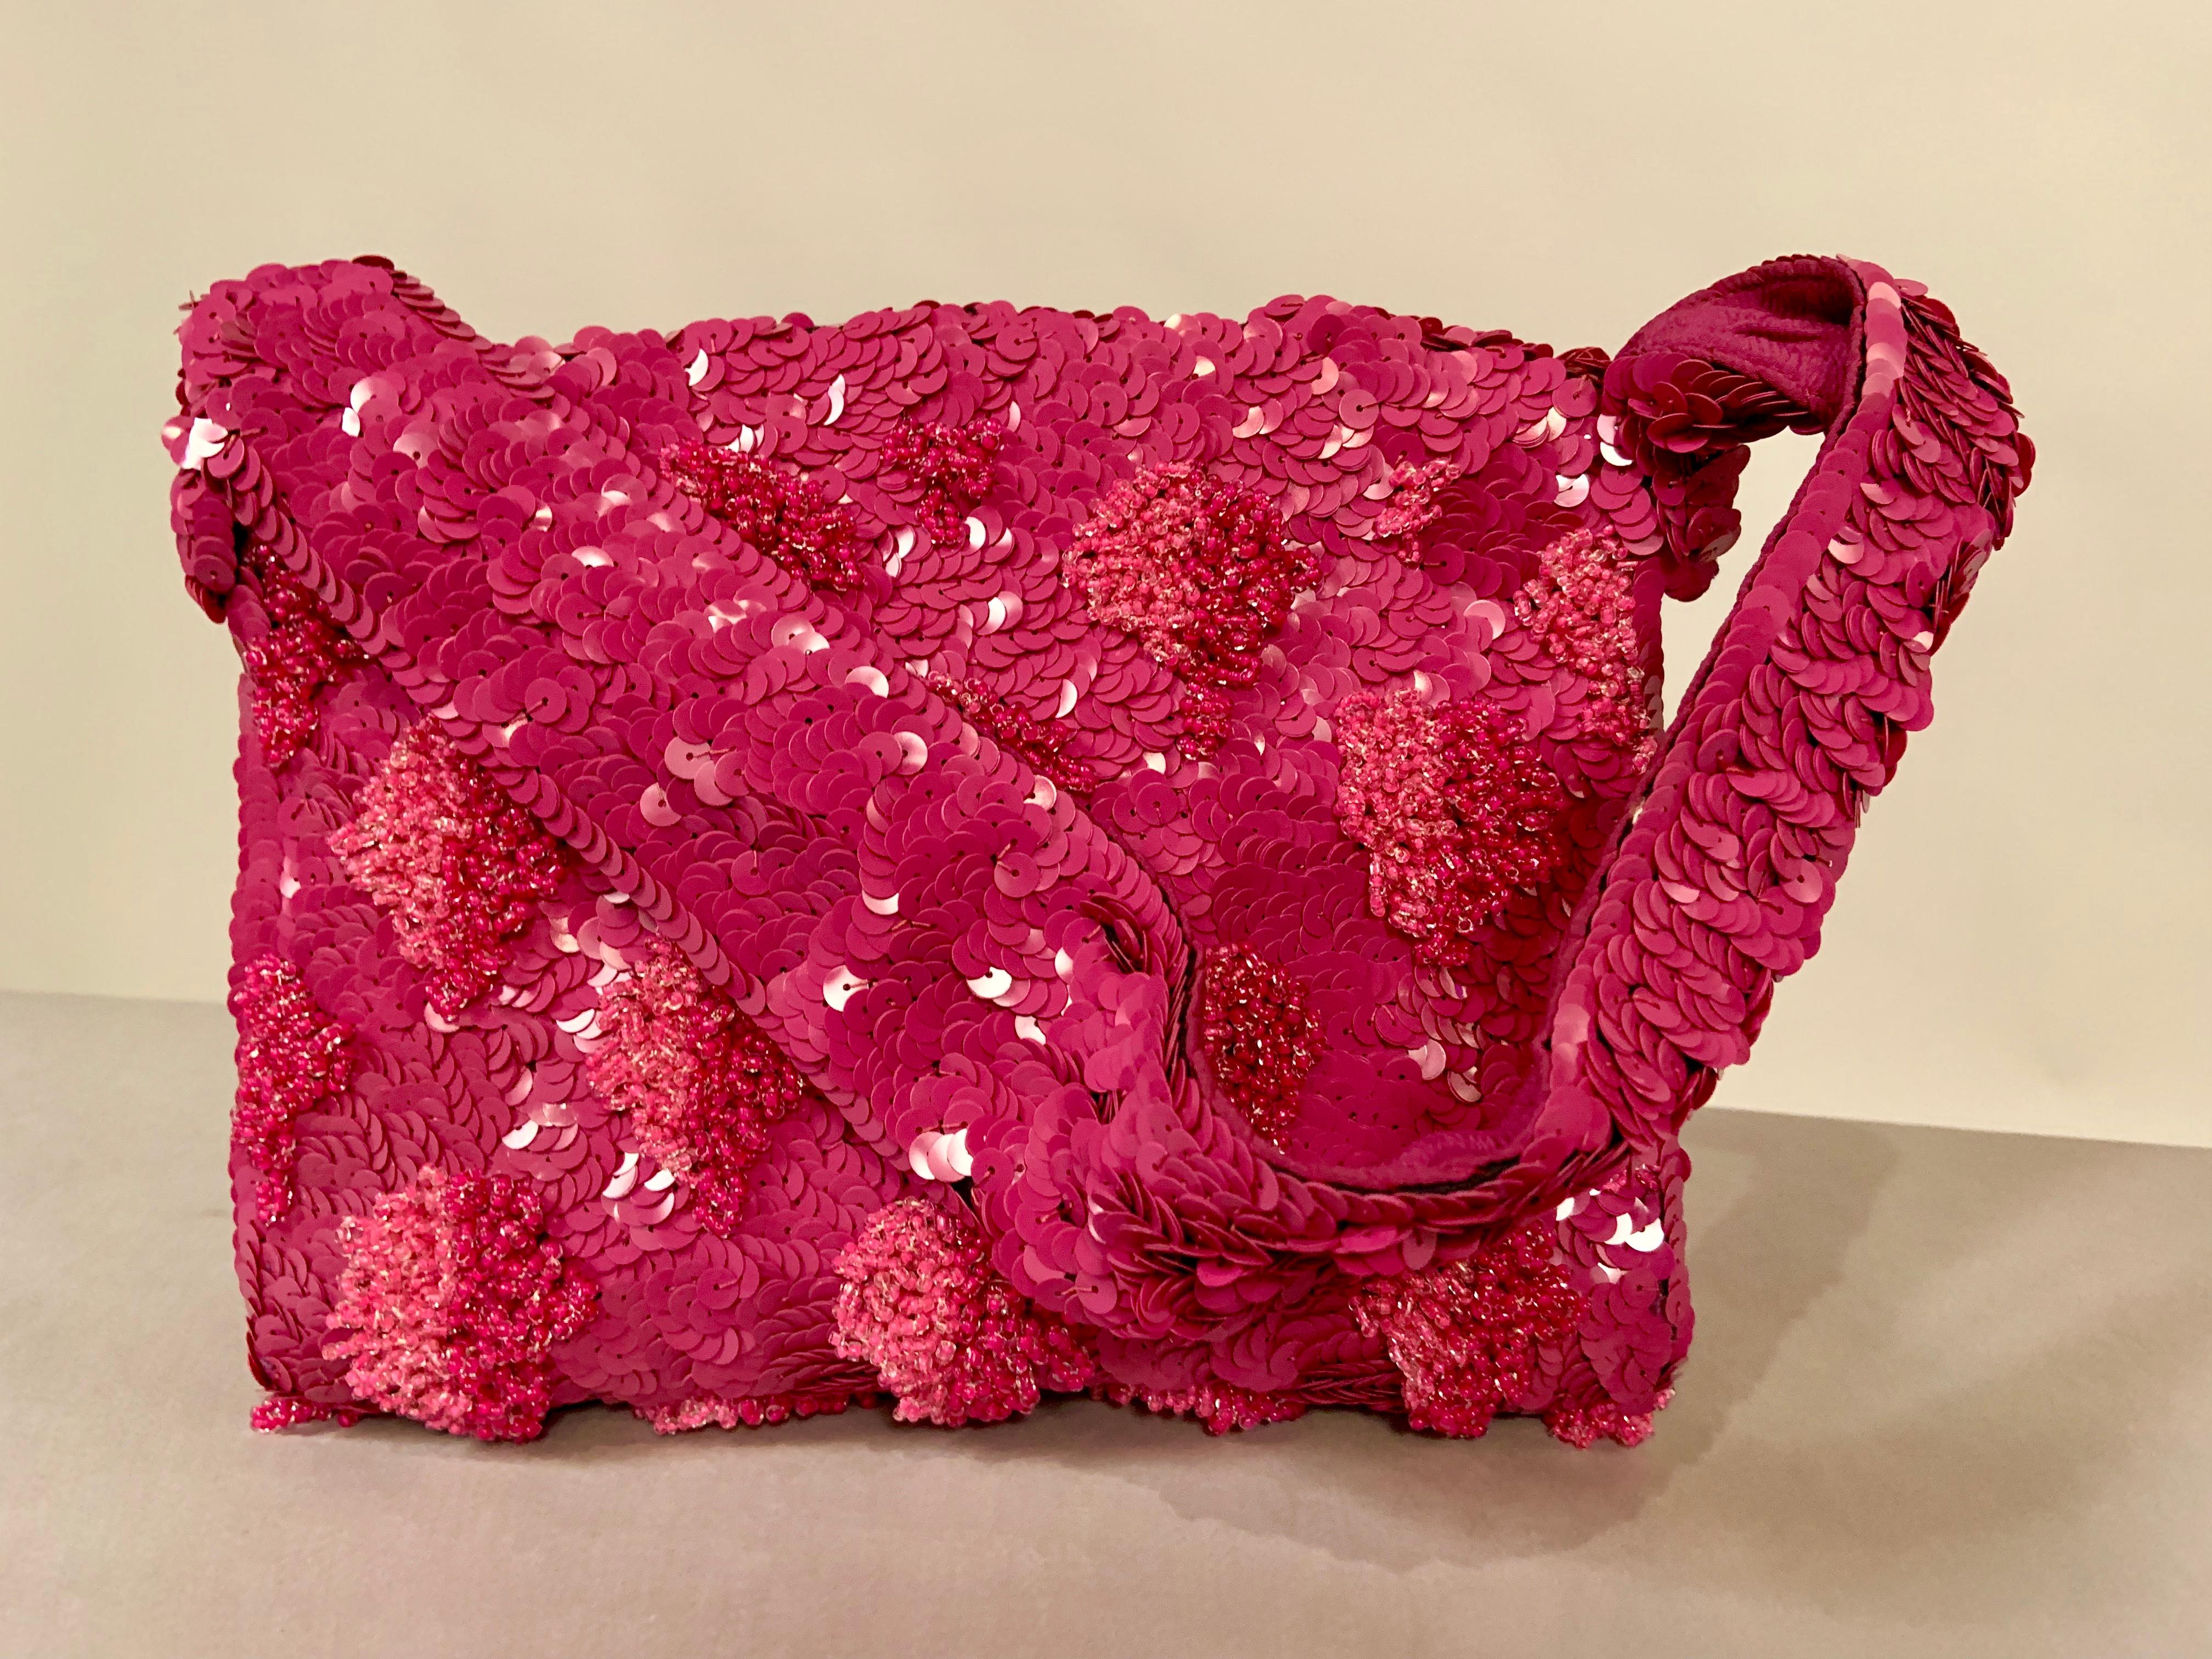 Lilac sequins are sewn in a circular pattern on  to to liac silk crepe. This is then rebeaded with loops of caviar beads in shades of lilac to pale pink in a floral or grape cluster motif. The bag has a wide beaded top handle, and a hinged opening.